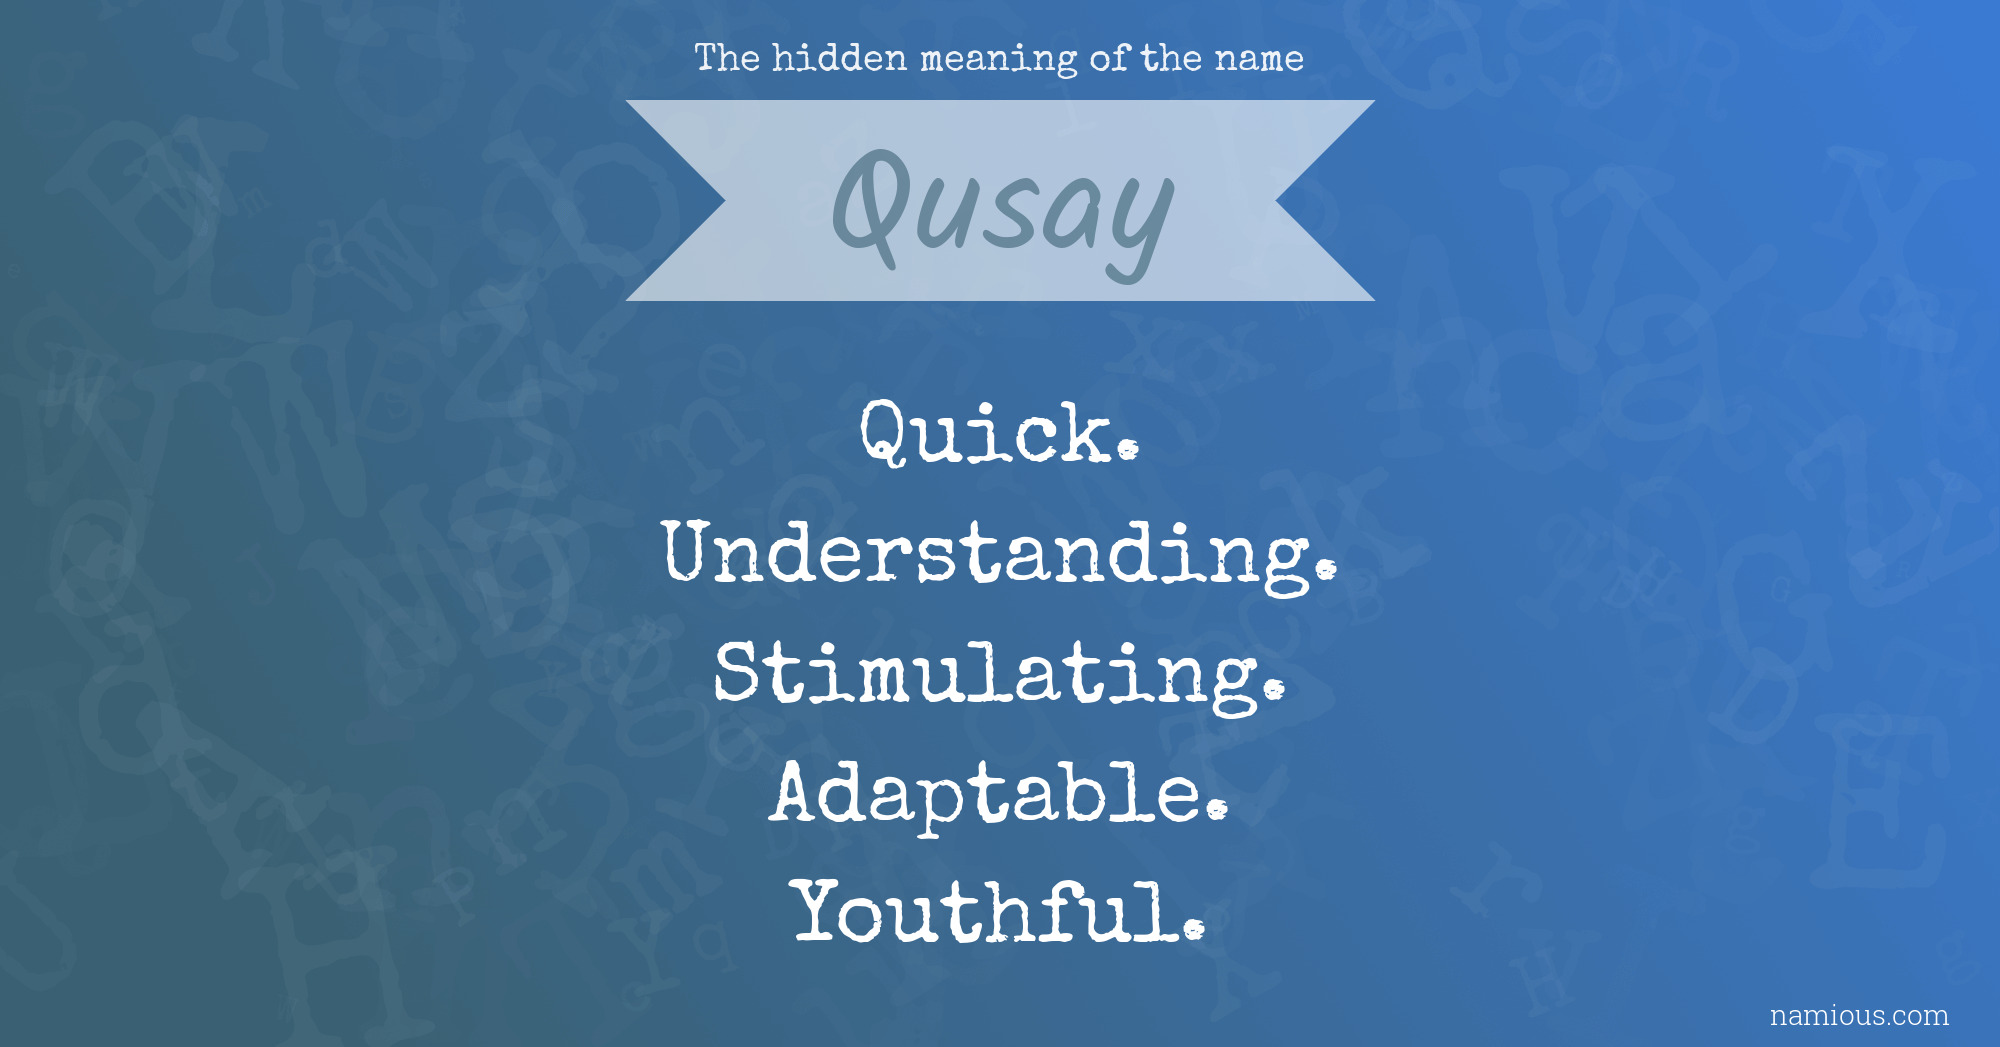 The hidden meaning of the name Qusay